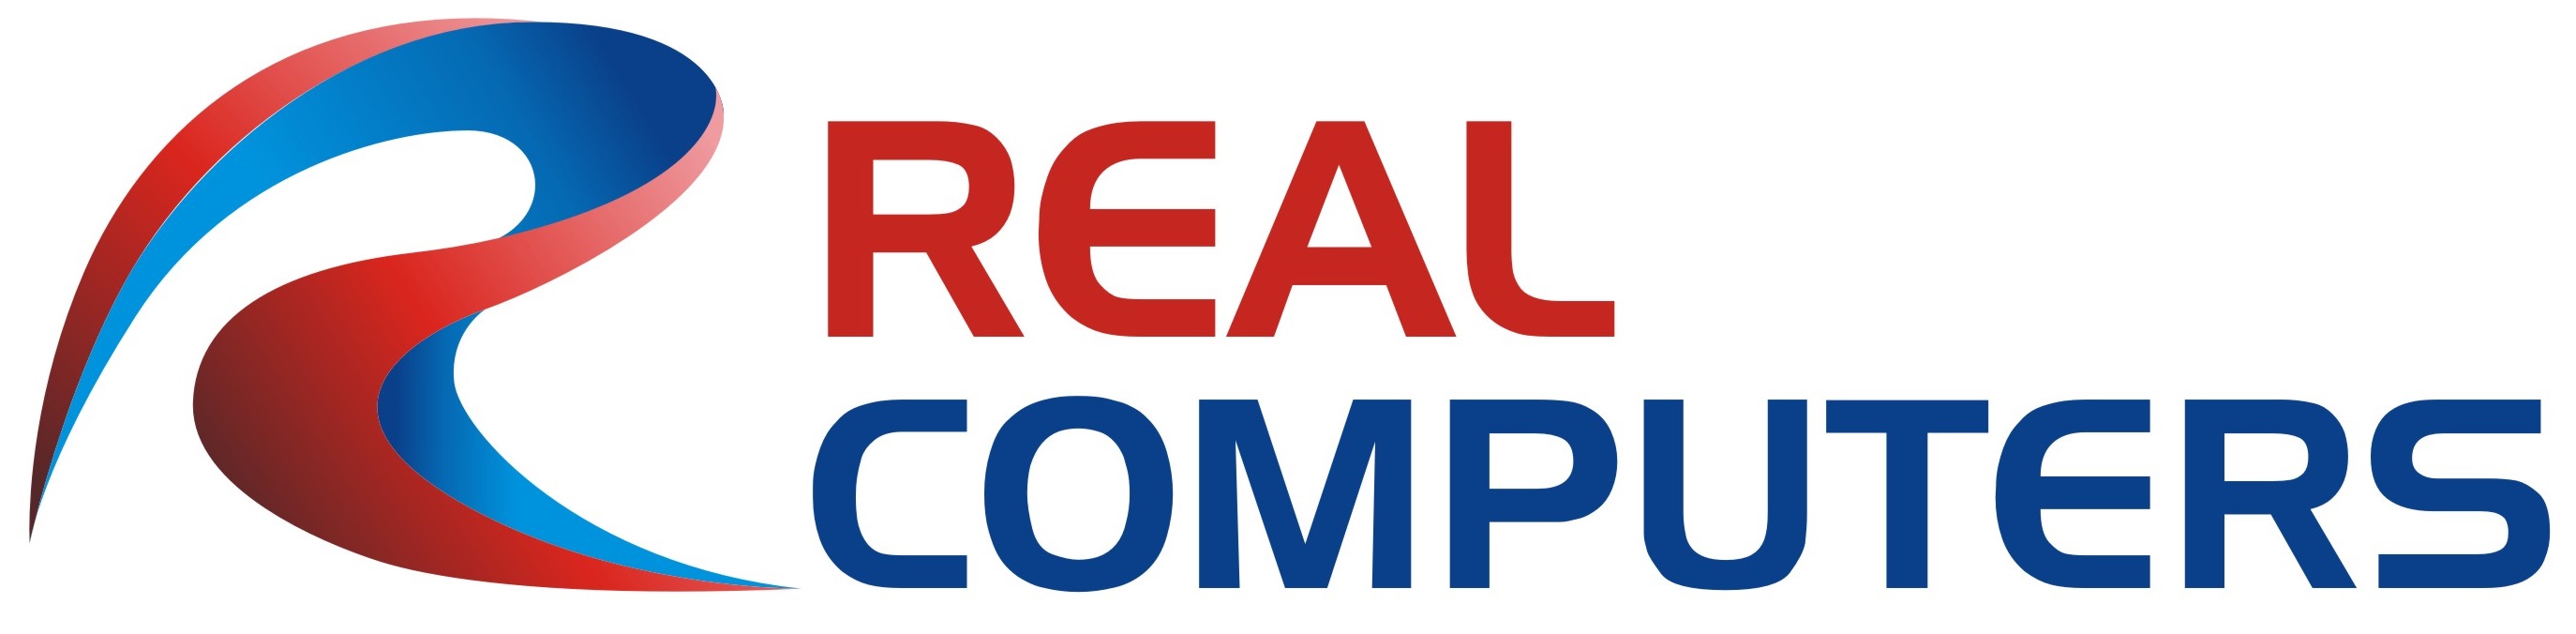 REAL COMPUTERS